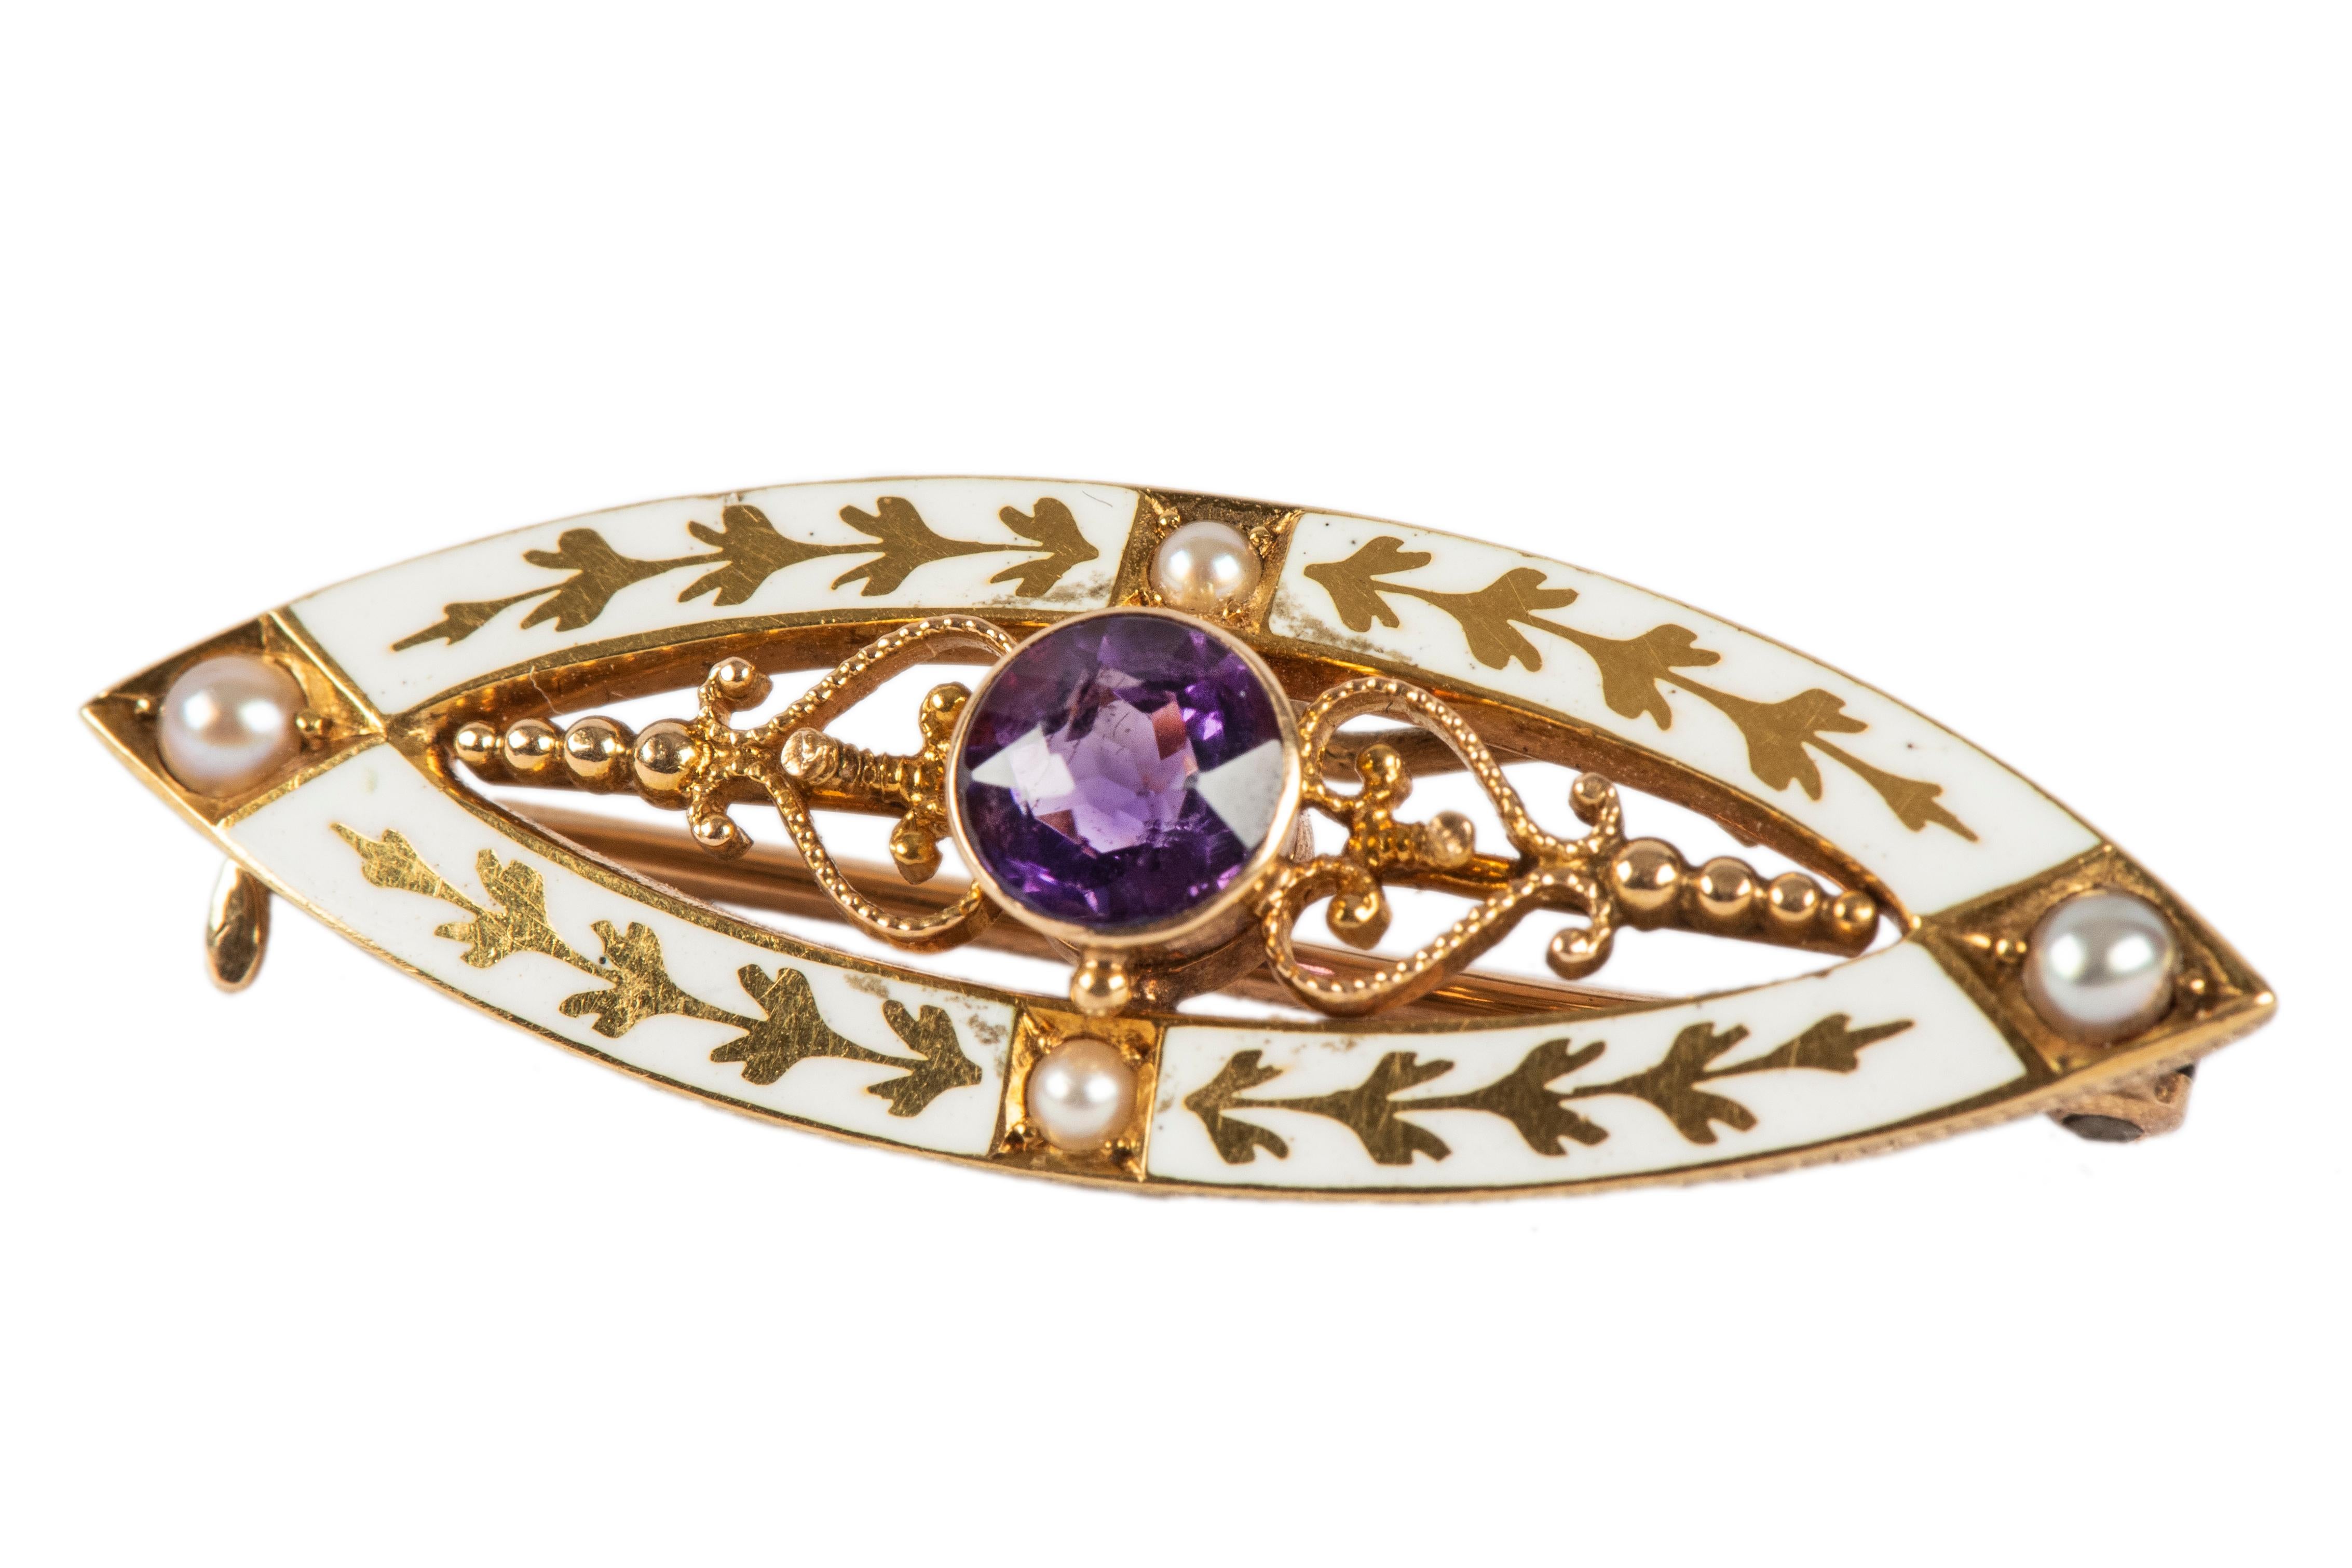 Of openwork elliptical design, with a white enamel border enhanced with gold laurel leaves and four small pearls. The centre features a bezel-set amethyst flanked by gold scrolls and beadwork. The early 20th-century American pin has added antique